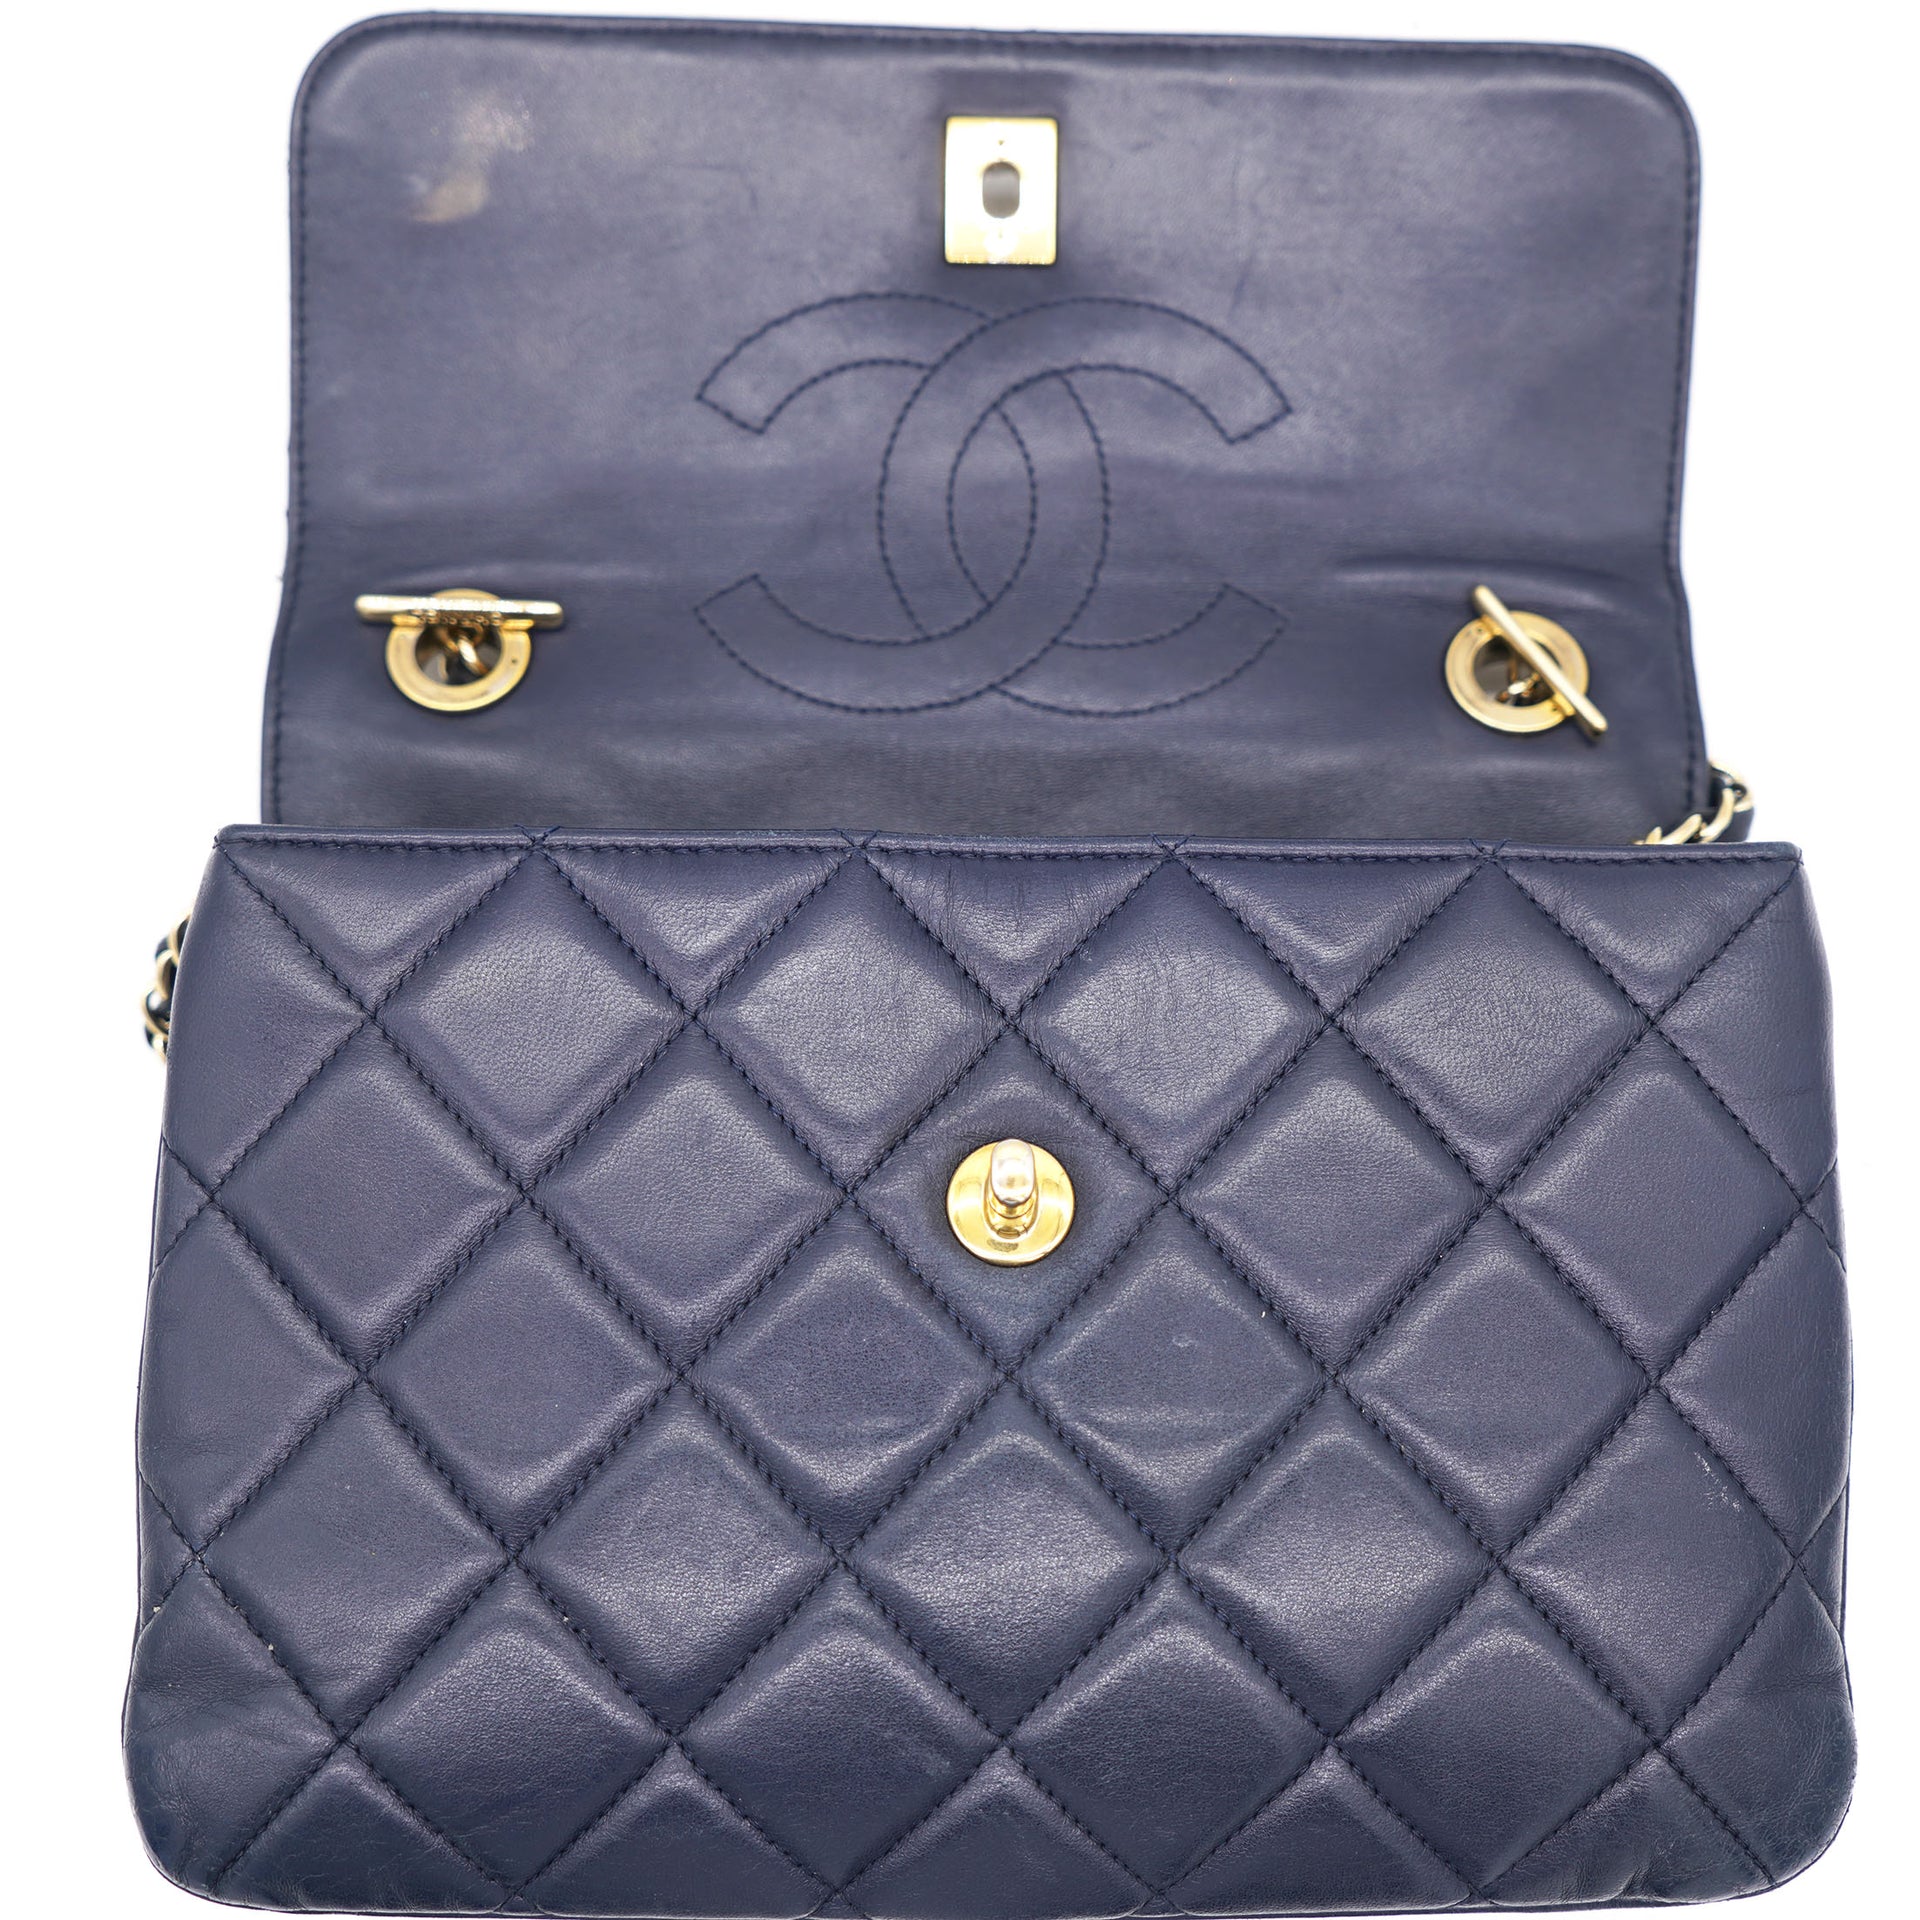 Vintage Chanel Quilted Navy Lambskin Leather Tote Bag From 1980s - Mrs  Vintage - Selling Vintage Wedding Lace Dress / Gowns & Accessories from  1920s – 1990s. And many One of a